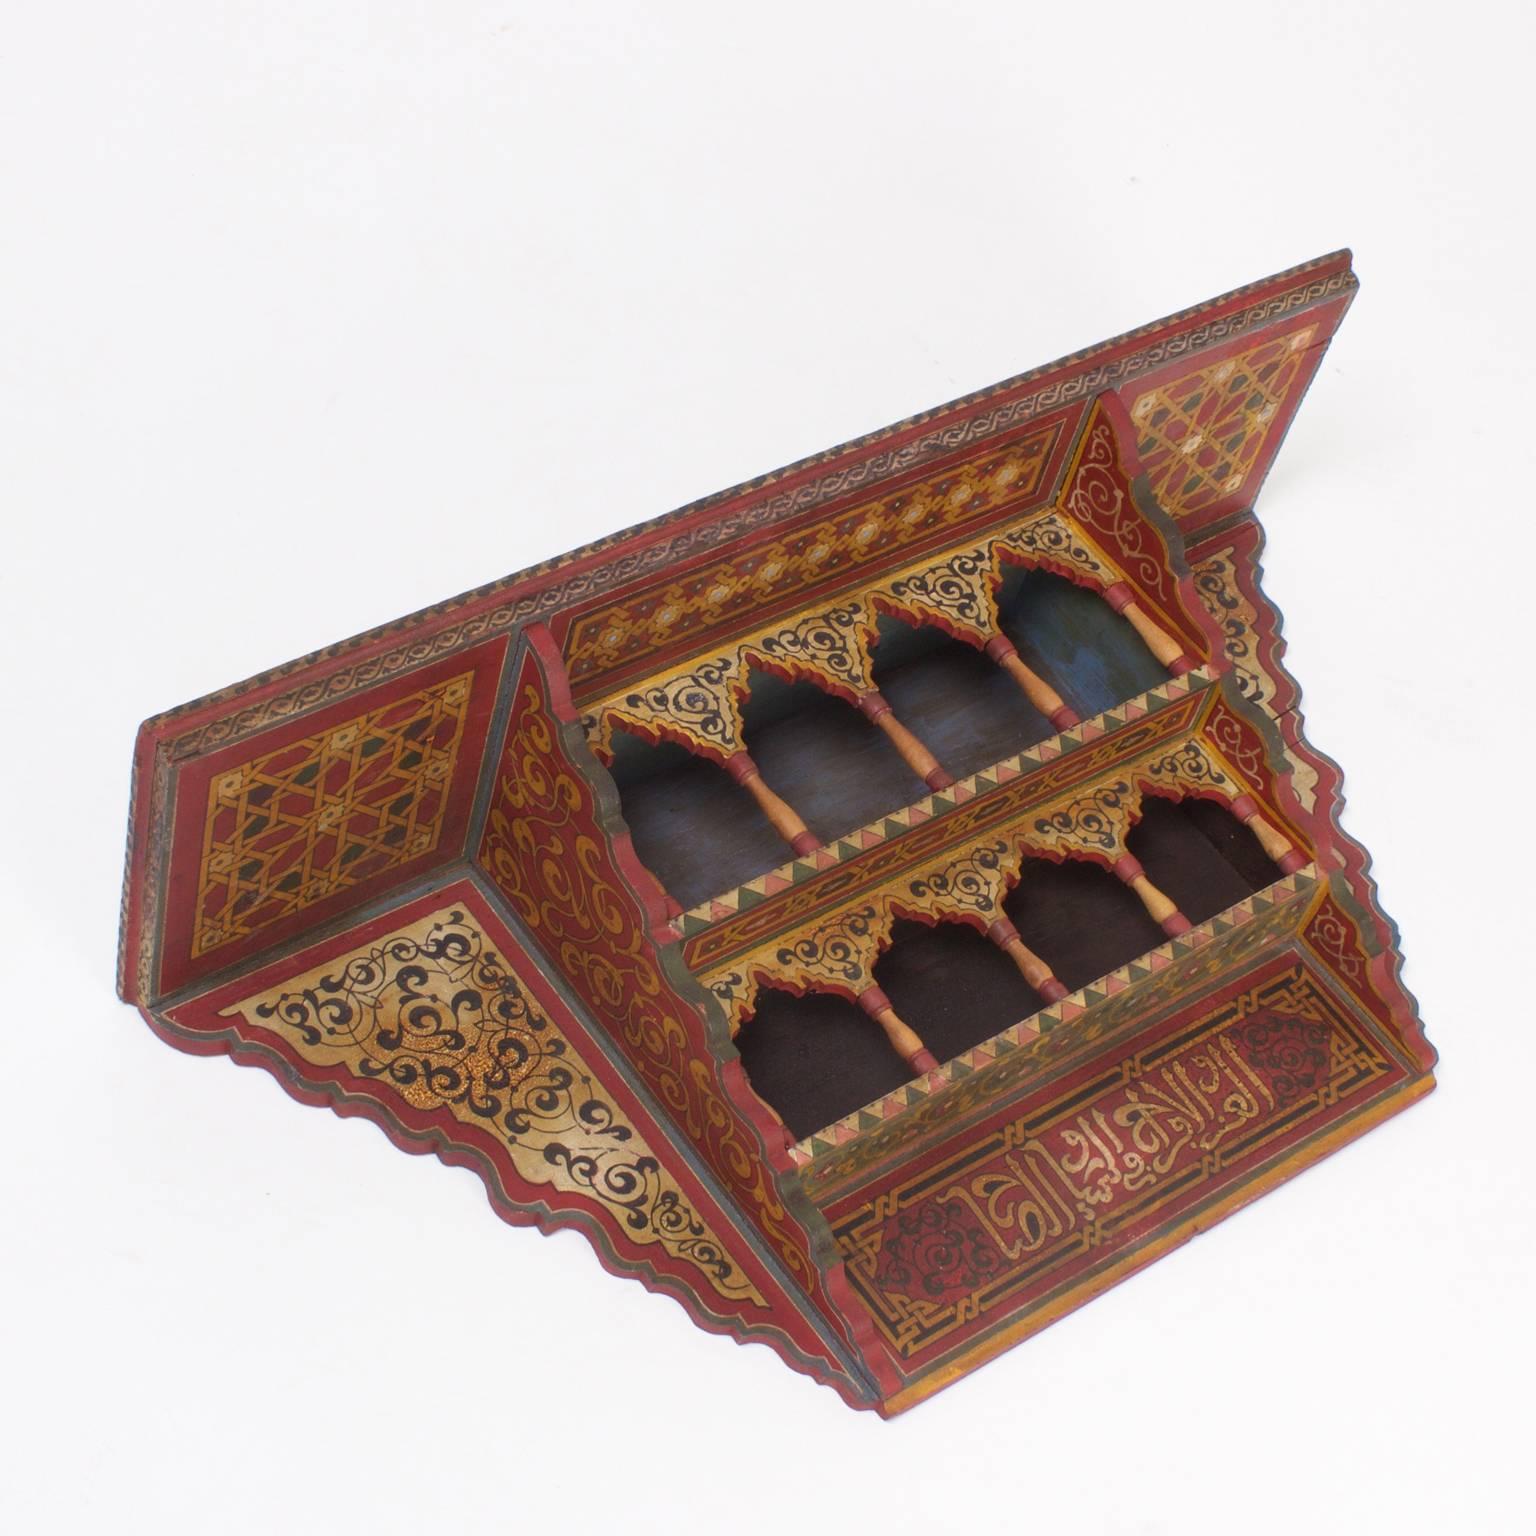 Delightful, Moroccan wall shelf or bracket painted in distinctive floral and geometric patterns with muted reds, yellows, and greens. All of this over arches and columns is representative of Moorish architecture.